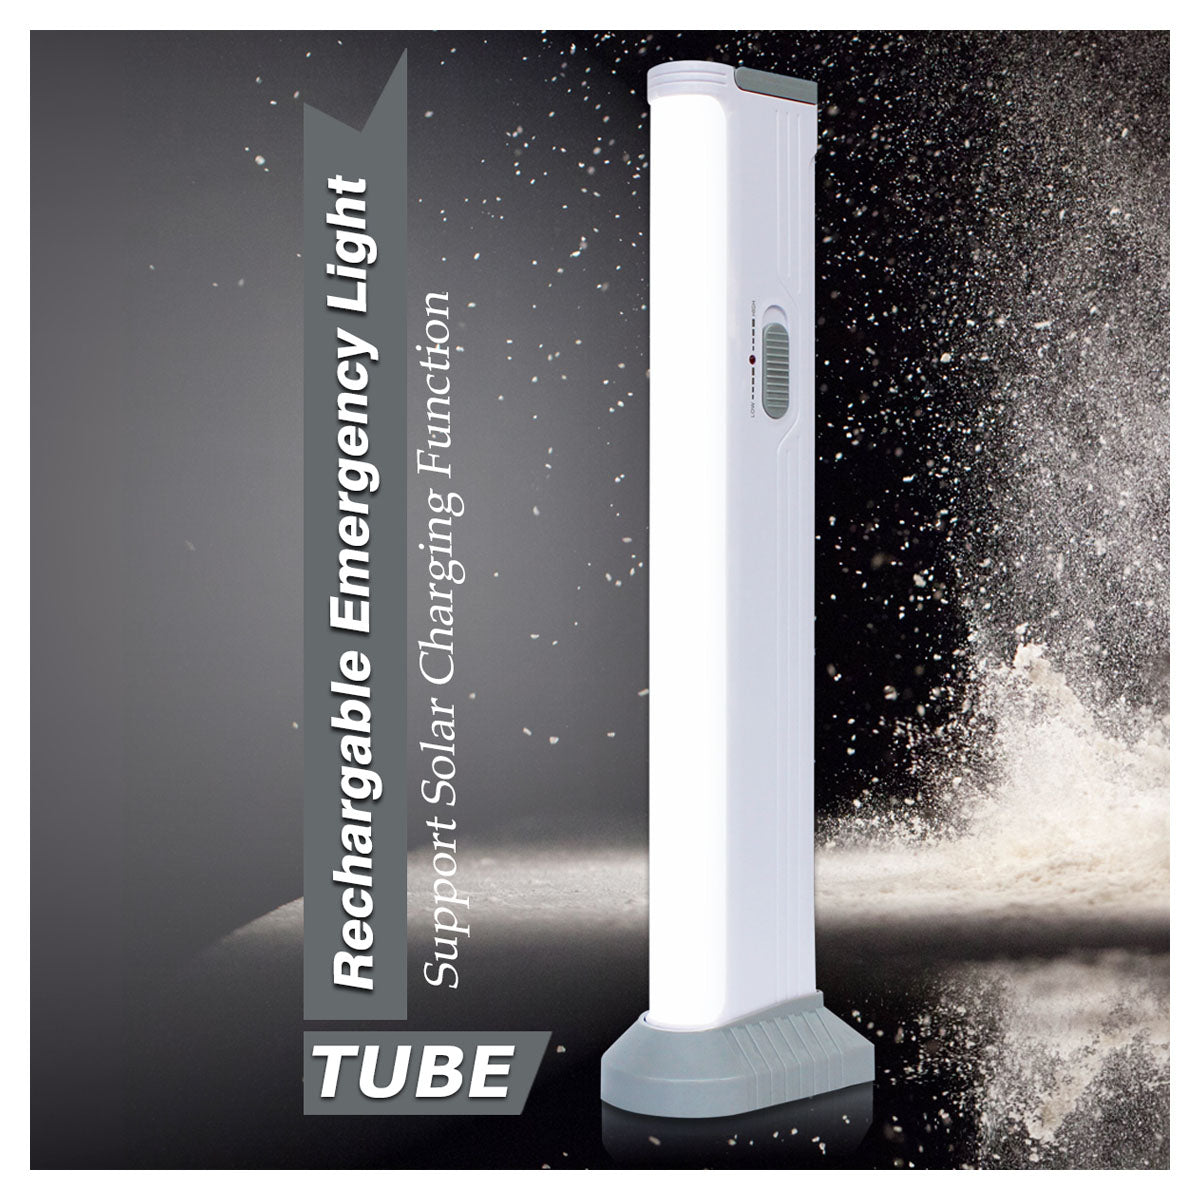 Pick Ur Needs® Super Bright Plastic Emergency Long Tube Light with Low and High Mode